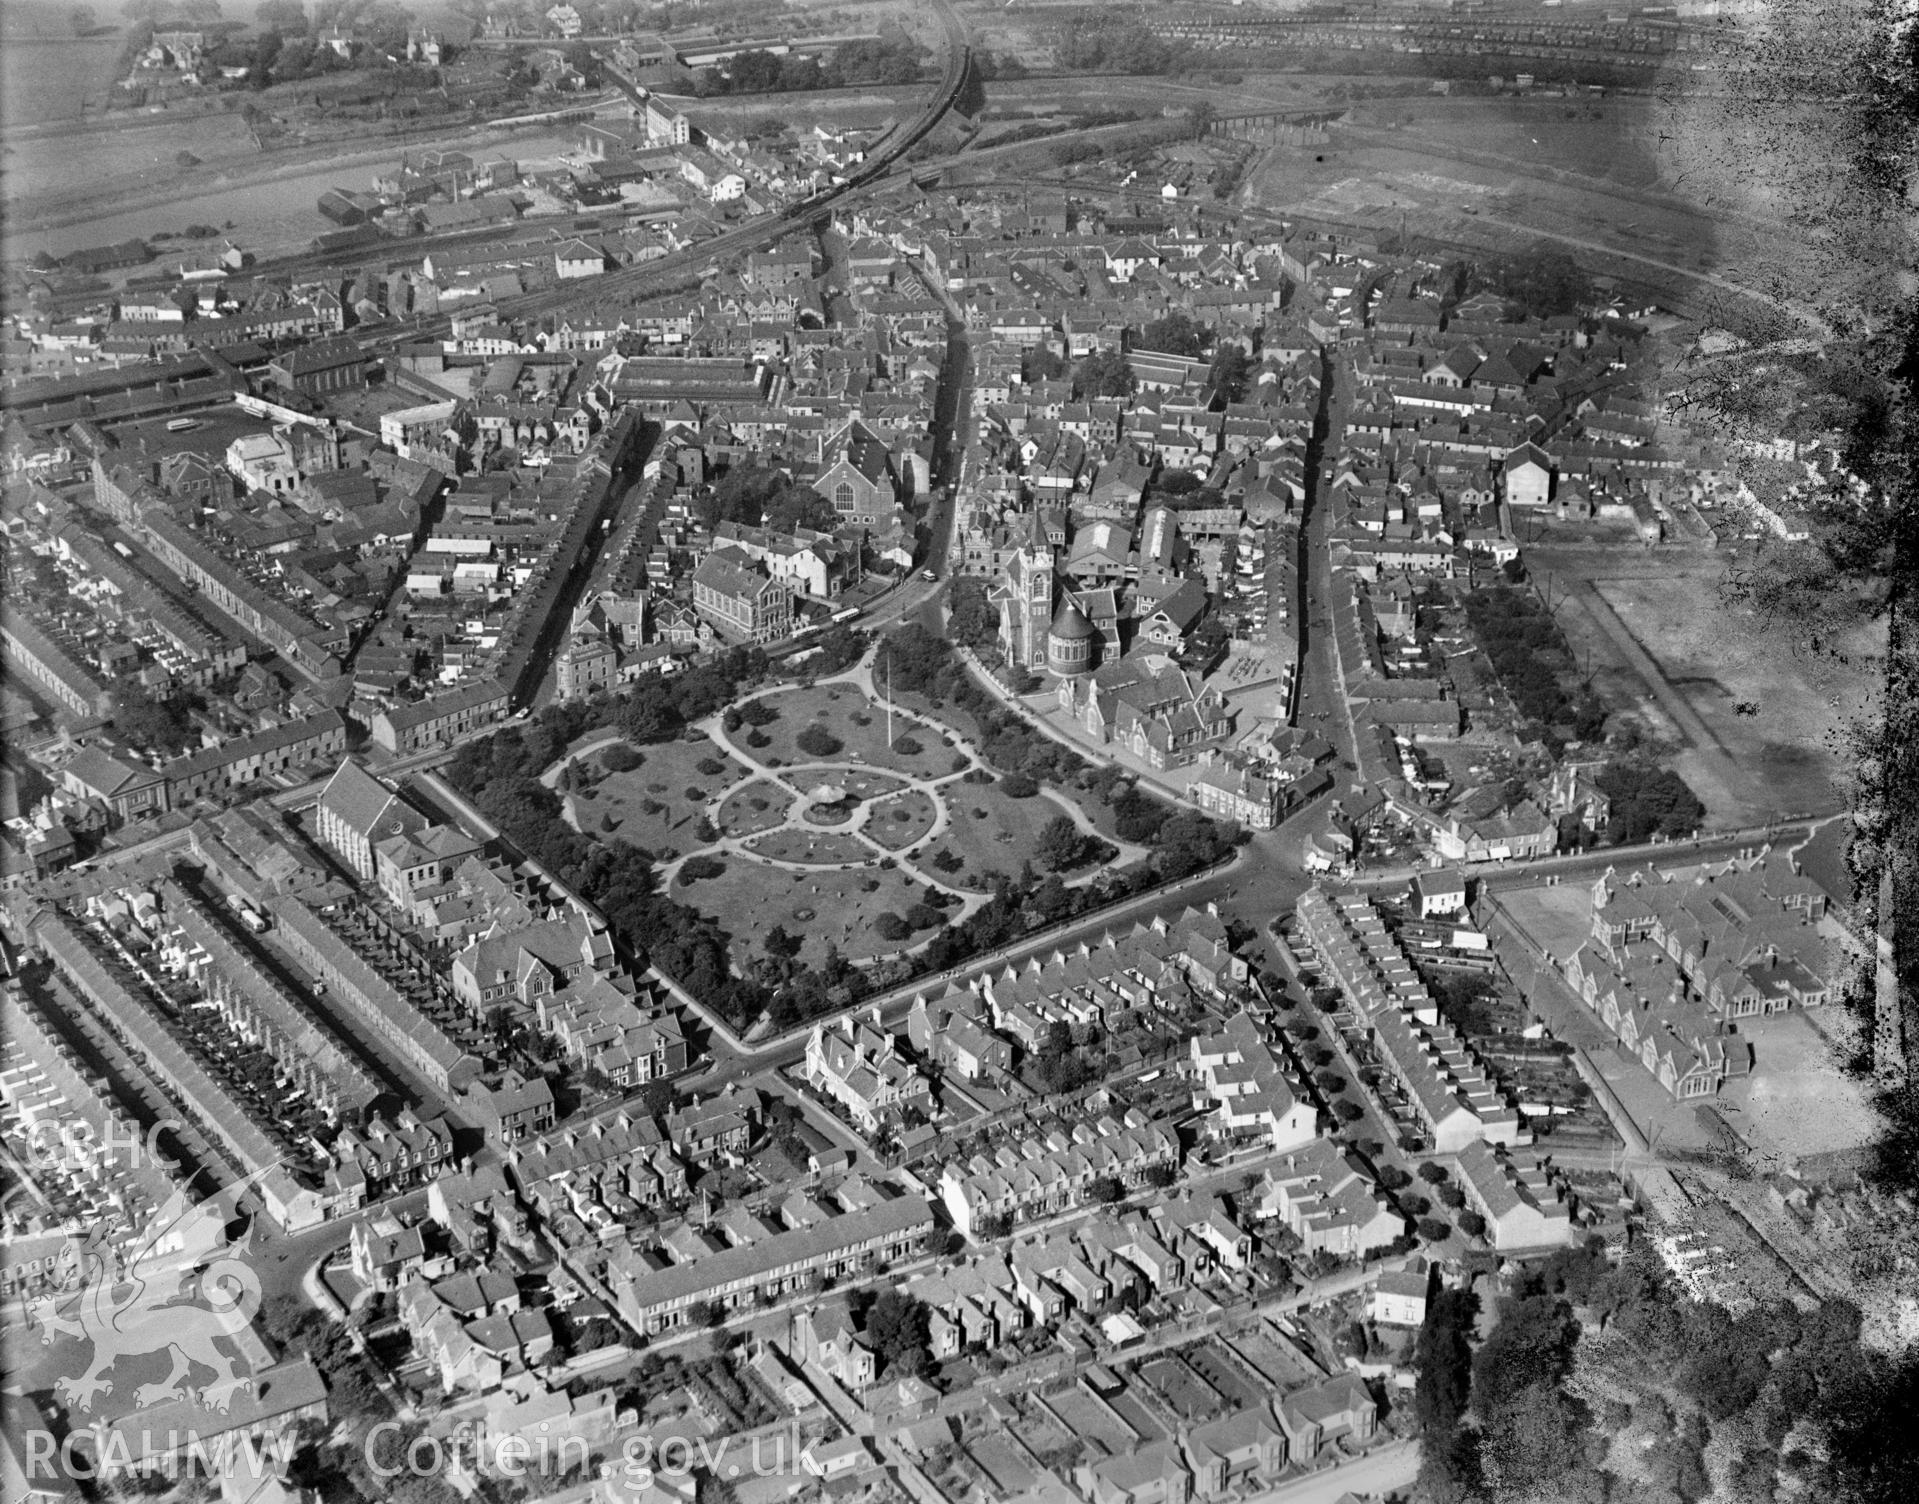 View of Victoria Gardens, Neath, oblique aerial view. 5?x4? black and white glass plate negative.